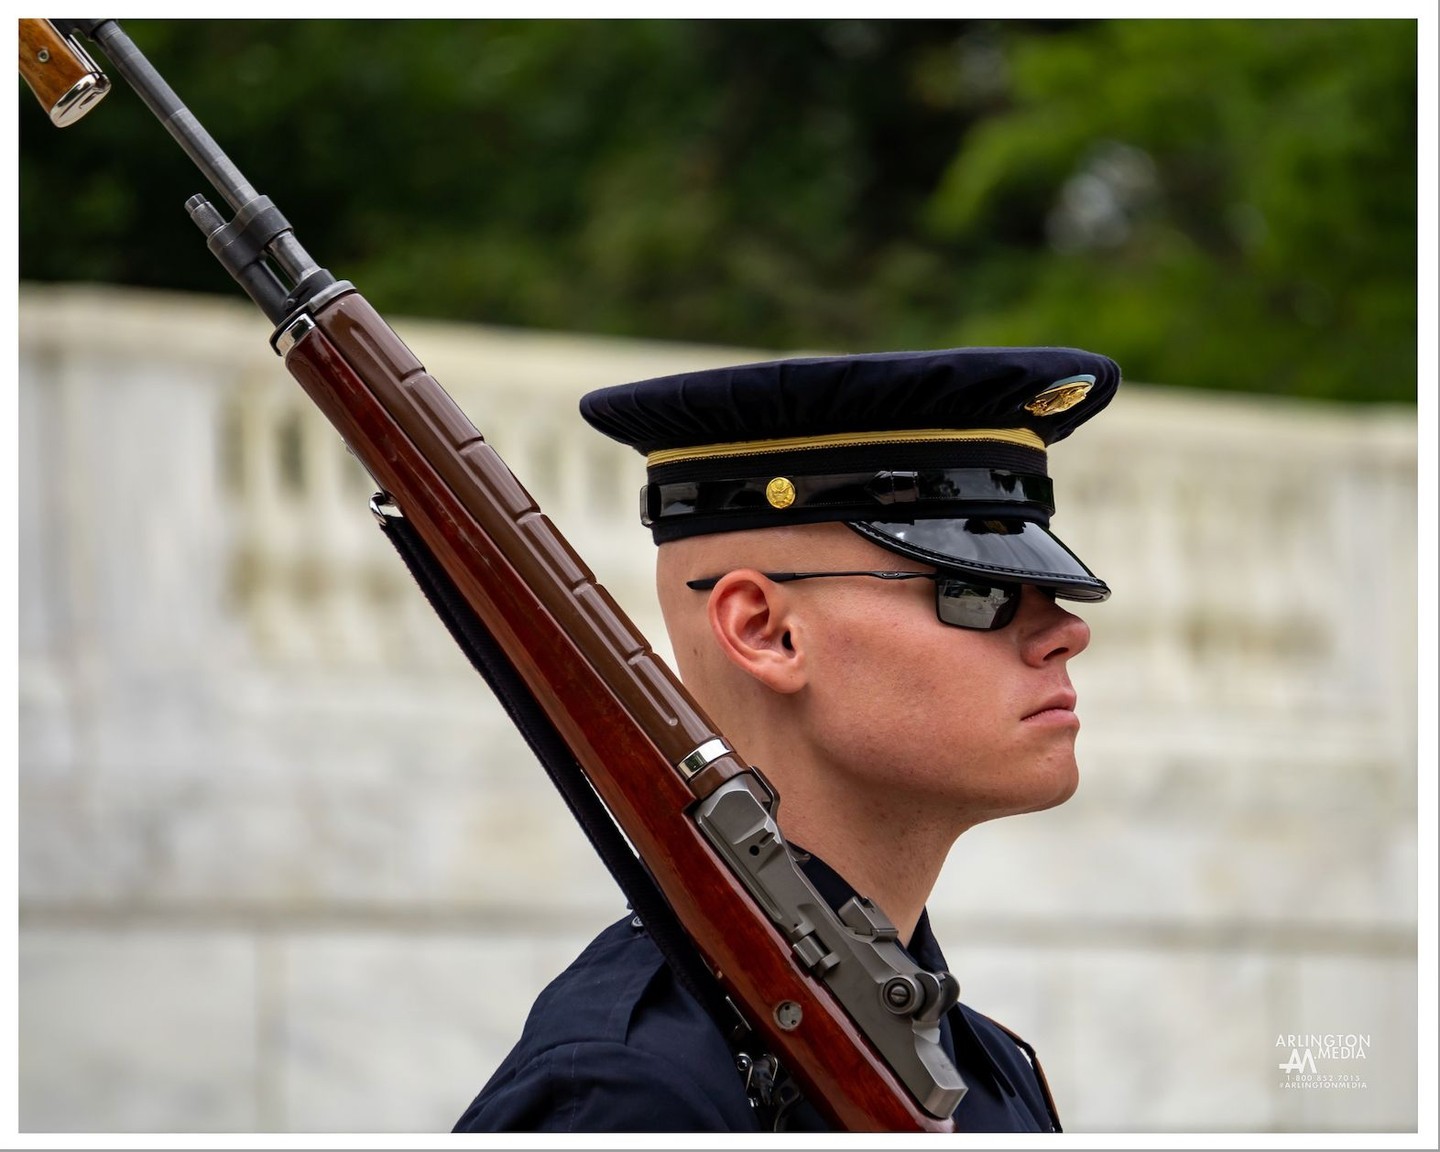 Twenty-four hours a day, soldiers from the 3rd U.S. Infantry Regiment, known as "The Old Guard," stand watch over the Tomb. The Tomb Guards, also called Sentinels, are chosen for this prestigious and highly selective post only after rigorous training and a demanding series of examinations (see below). The Old Guard has held this distinguished duty since 1948. 

An impeccably uniformed relief commander appears on the plaza to announce the changing of the guard. Soon, the new Sentinel leaves the Tomb Guard quarters and unlocks the bolt of his or her M-14 rifle, signaling to the relief commander to begin the ceremony. The relief commander walks out to the Tomb and salutes, then faces the spectators and asks them to stand and remain silent during the ceremony.

The relief commander conducts a detailed white-glove inspection of the weapon, checking each part of the rifle once. Then, the relief commander and the relieving Sentinel meet the retiring Sentinel at the center of the black mat in front of the Tomb. All three salute the Unknown Soldiers who have symbolically been given the Medal of Honor. The relief commander orders the relieved Sentinel, "Pass on your orders." The current Sentinel commands, "Post and orders, remain as directed." The newly posted Sentinel replies, "Orders acknowledged," and steps into position on the mat. When the relief commander passes, the new Sentinel begins walking at a cadence of 90 steps per minute.

The Tomb Guard marches exactly 21 steps down the black mat behind the Tomb, turns, faces east for 21 seconds, turns and faces north for 21 seconds, then takes 21 steps down the mat and repeats the process. (The number 21 symbolizes the highest military honor that can be bestowed, the 21-gun salute.) Next, the Sentinel executes a sharp "shoulder-arms" movement to place the weapon on the shoulder closest to the visitors, signifying that he or she stands between the Tomb and any possible threat. - Arlington National Cemetery